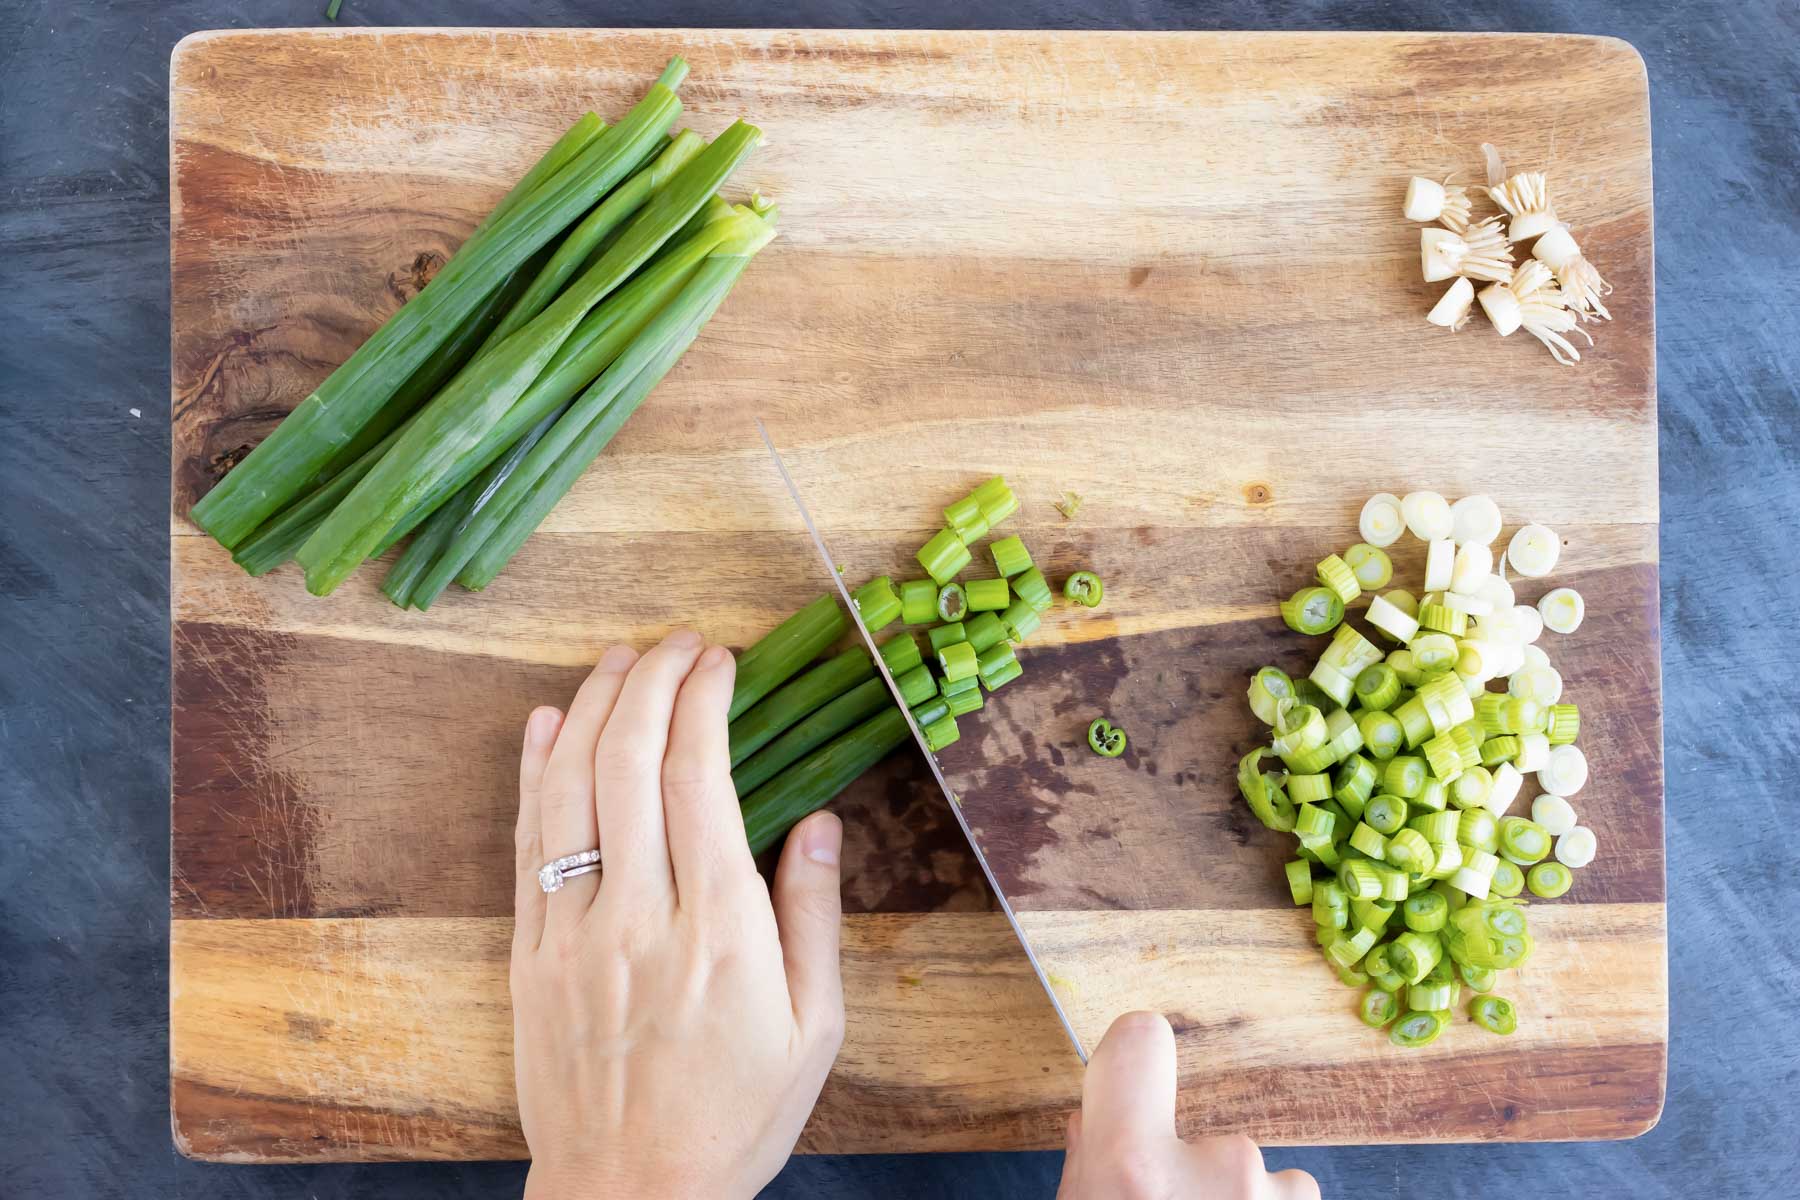 Using a knife to chop green onions For pad Thai on a cutting board.